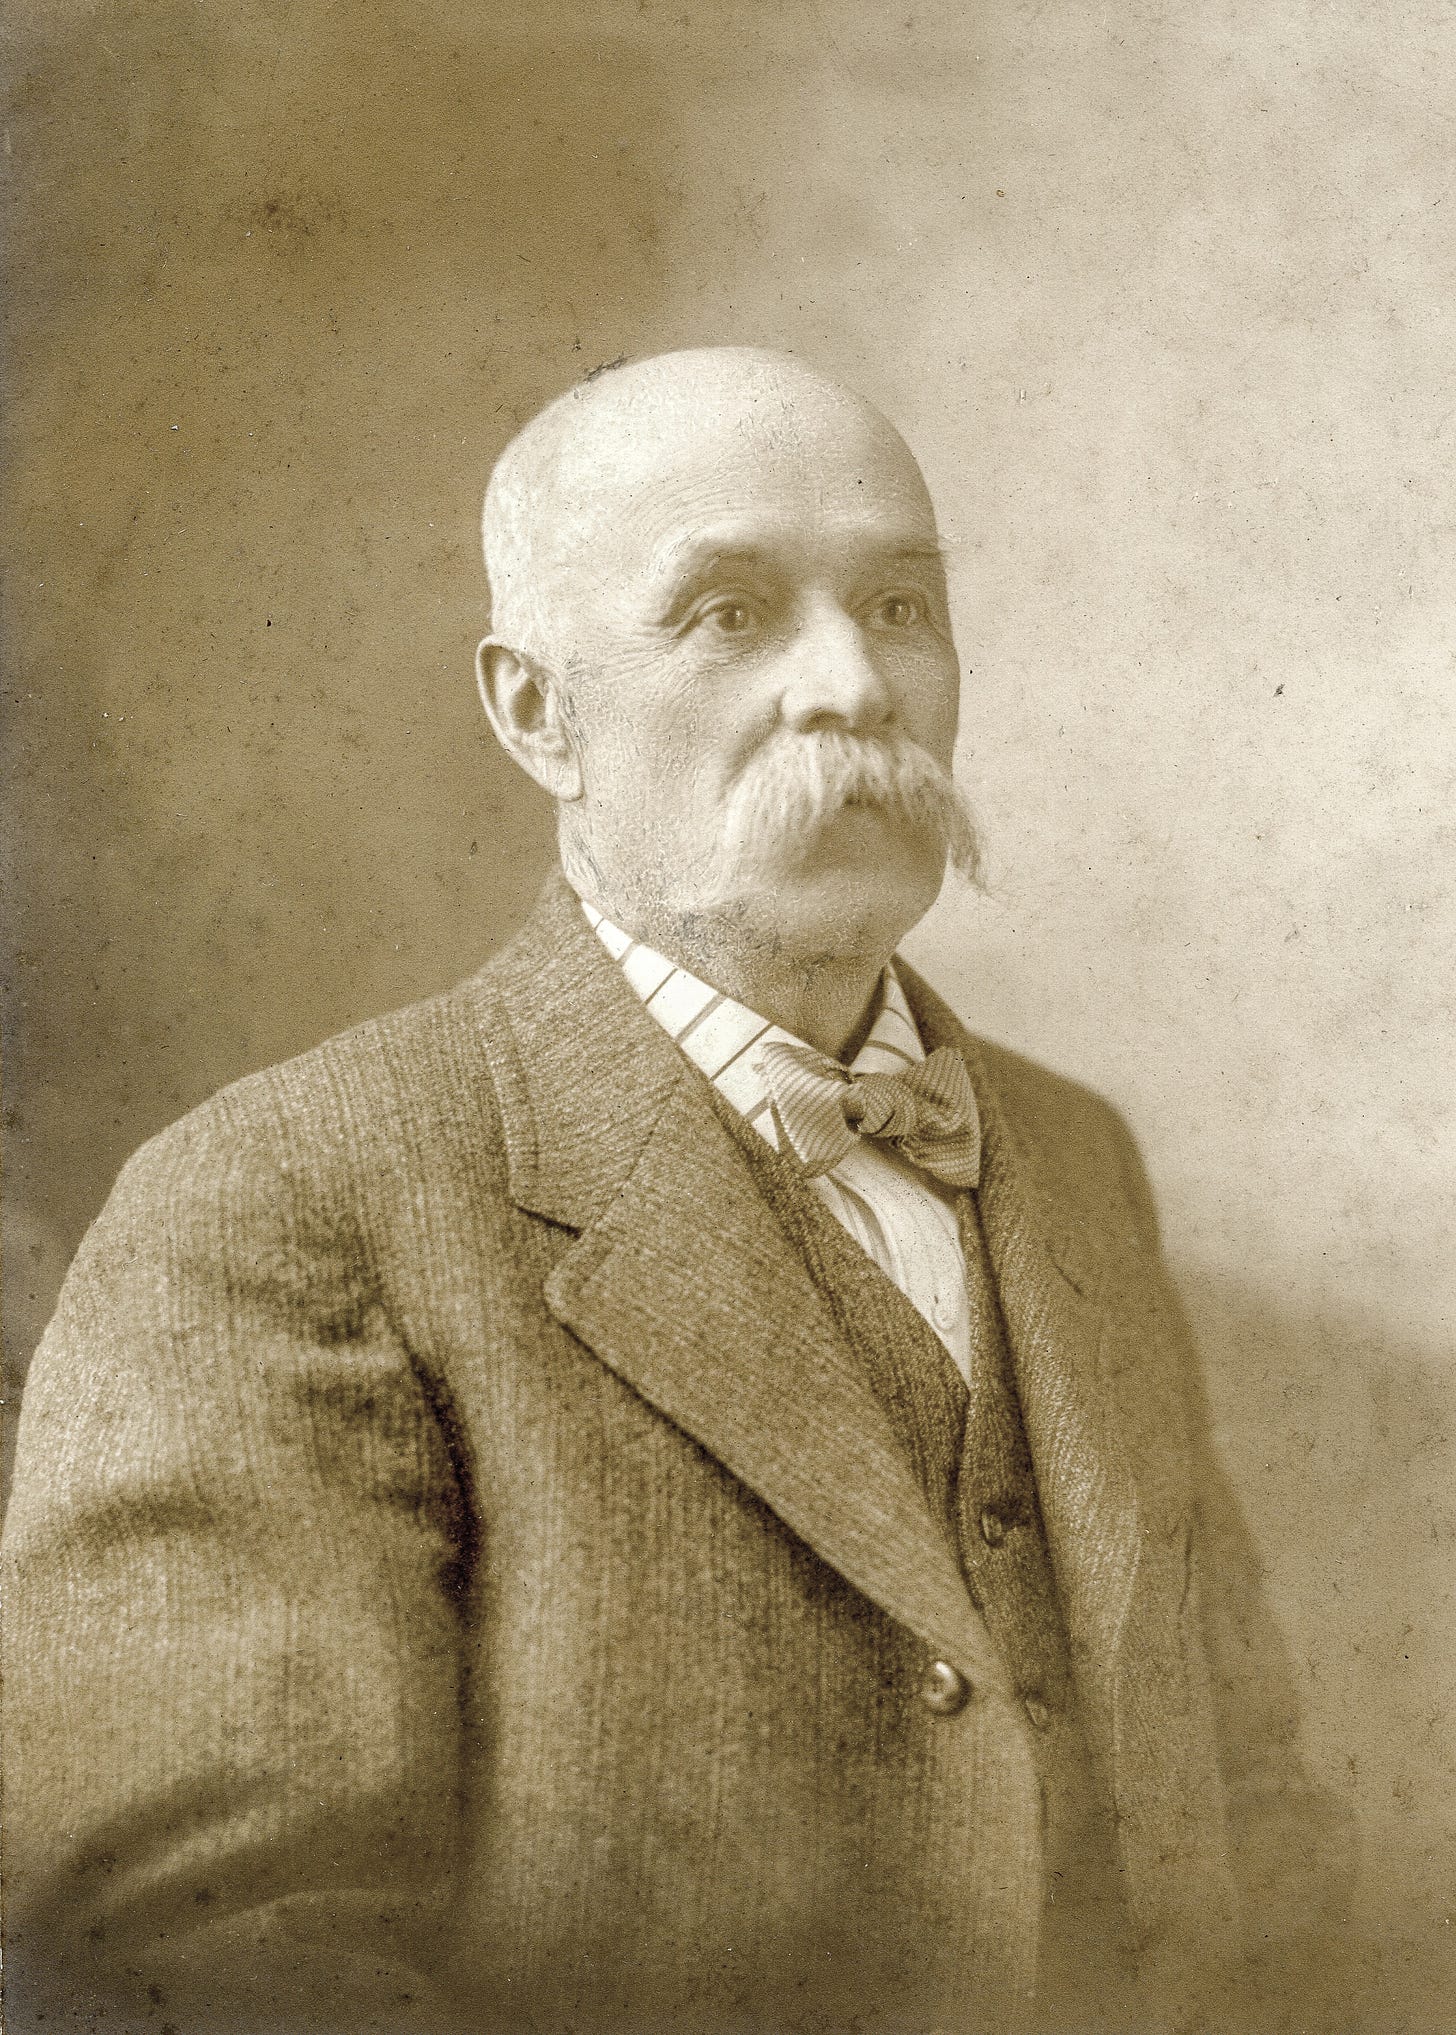 Harlan Page Holt